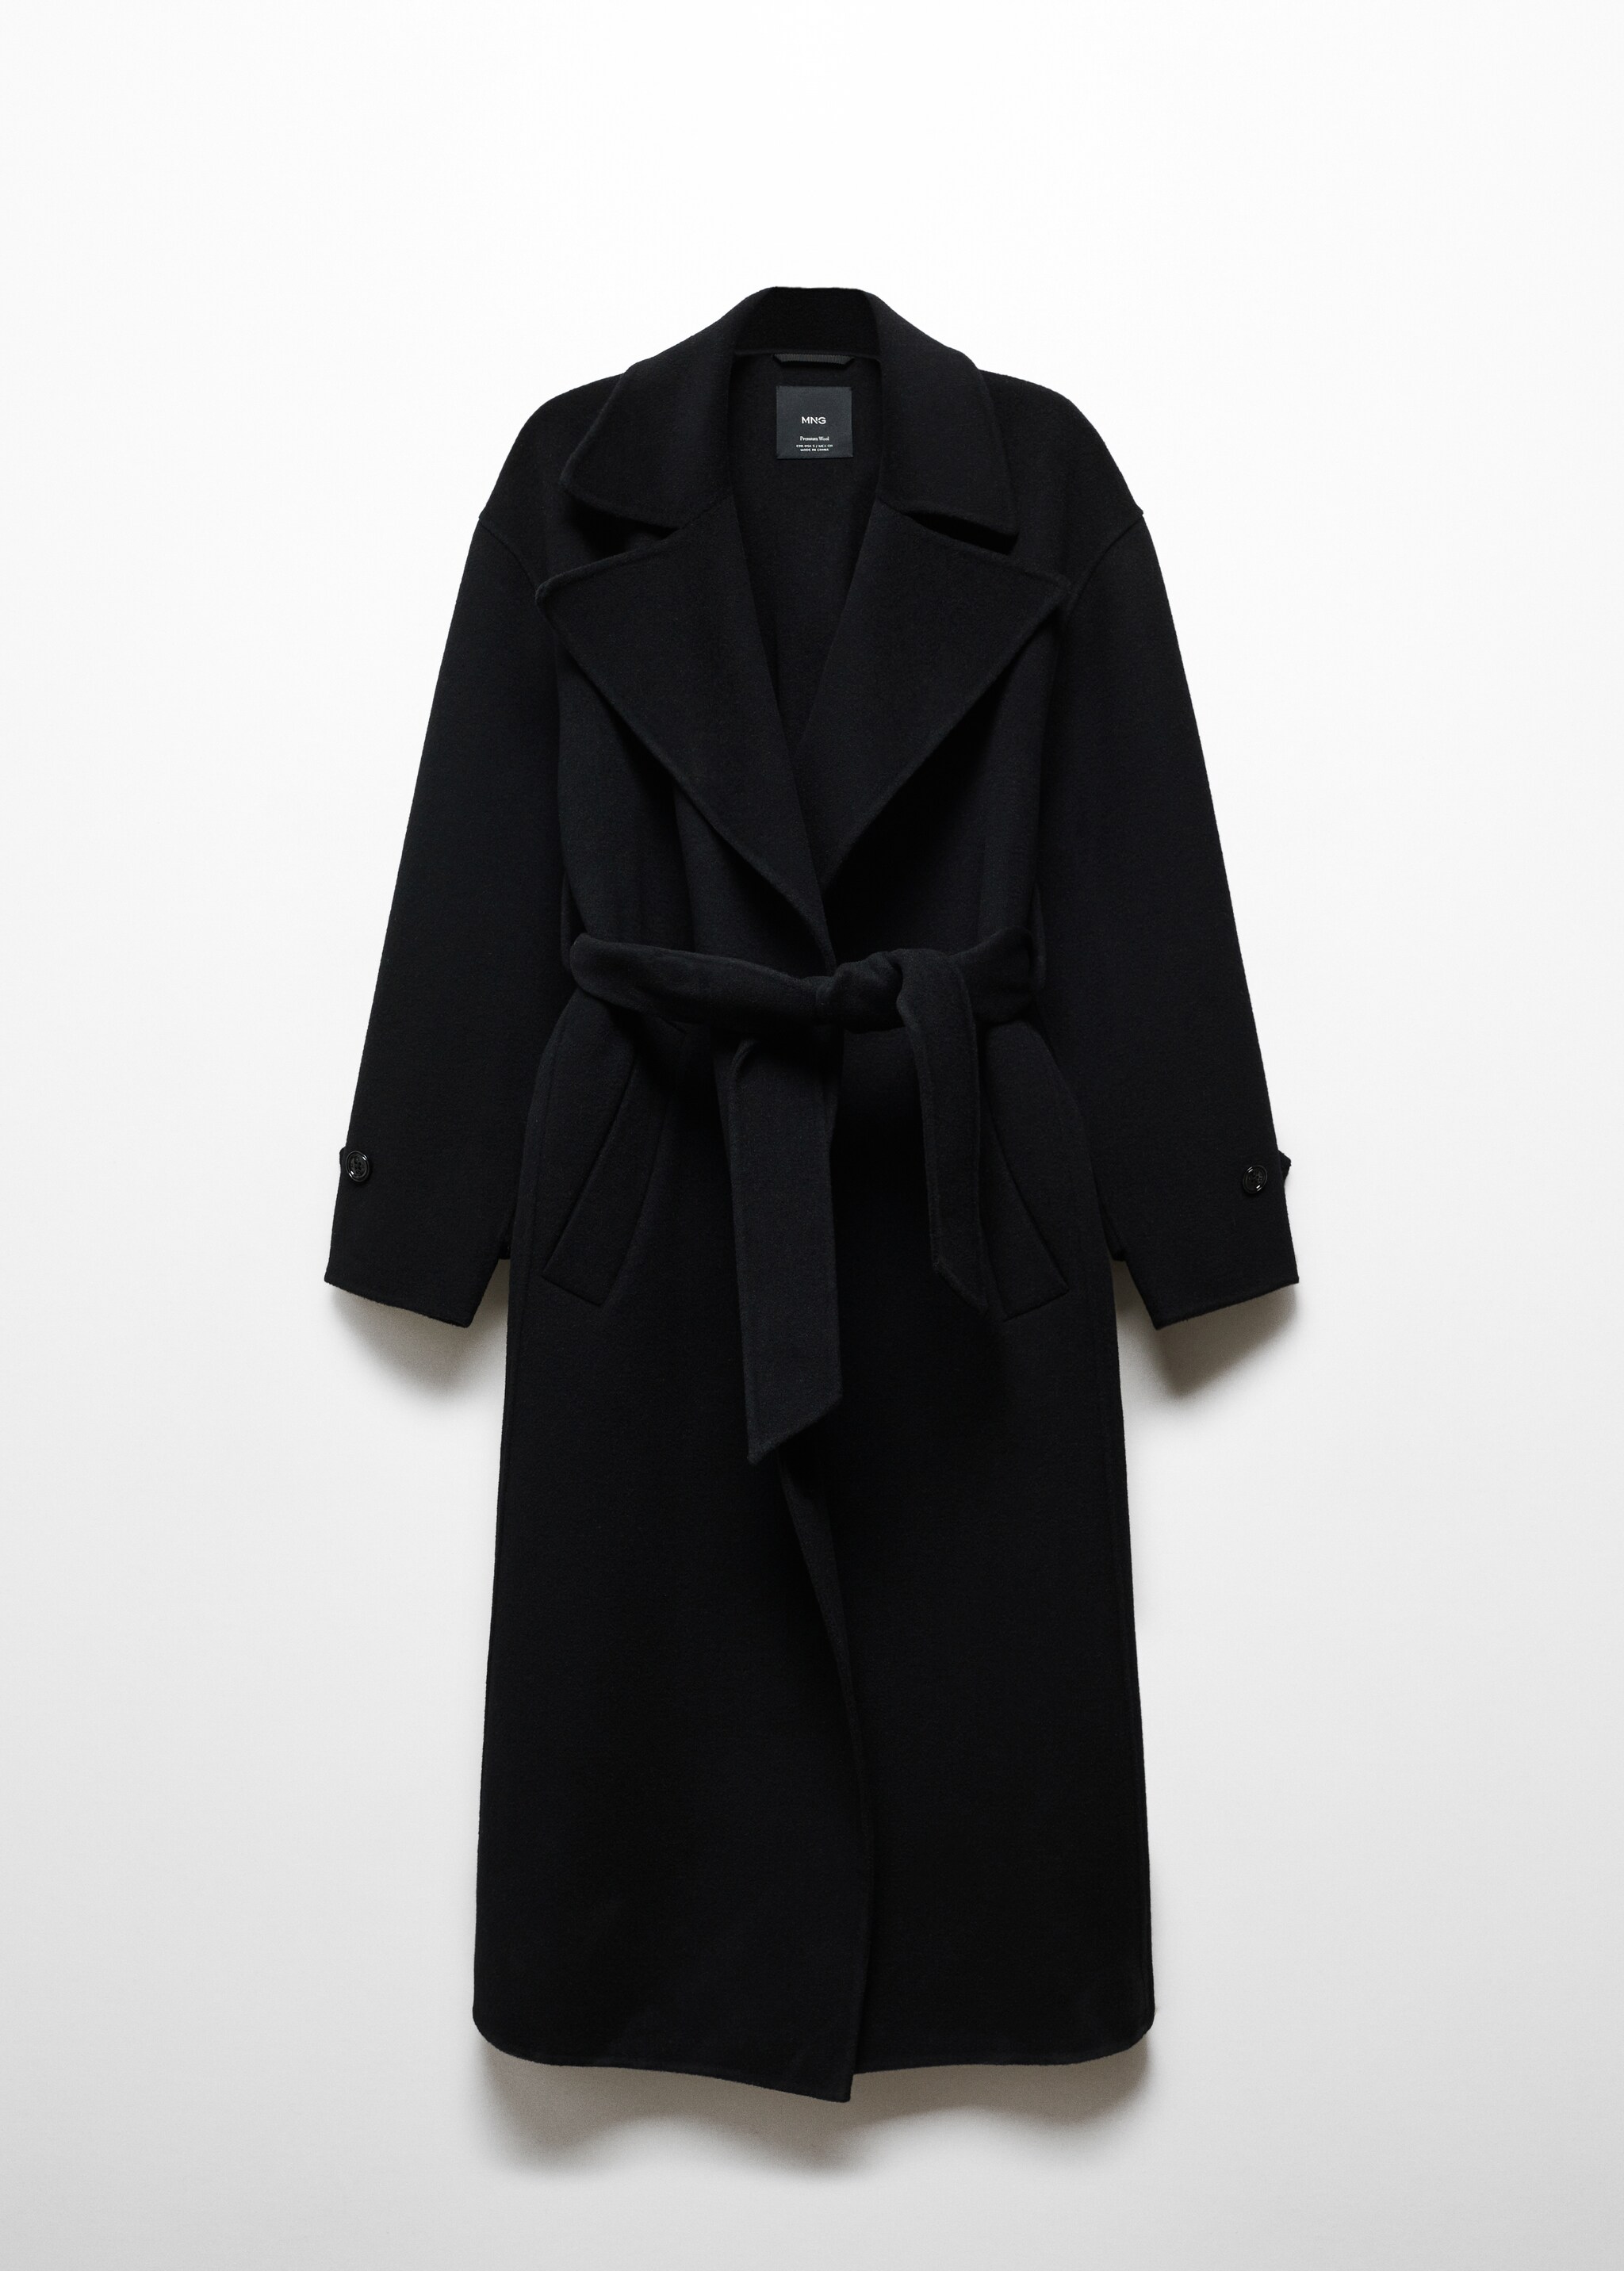 Woolen coat with belt - Article without model